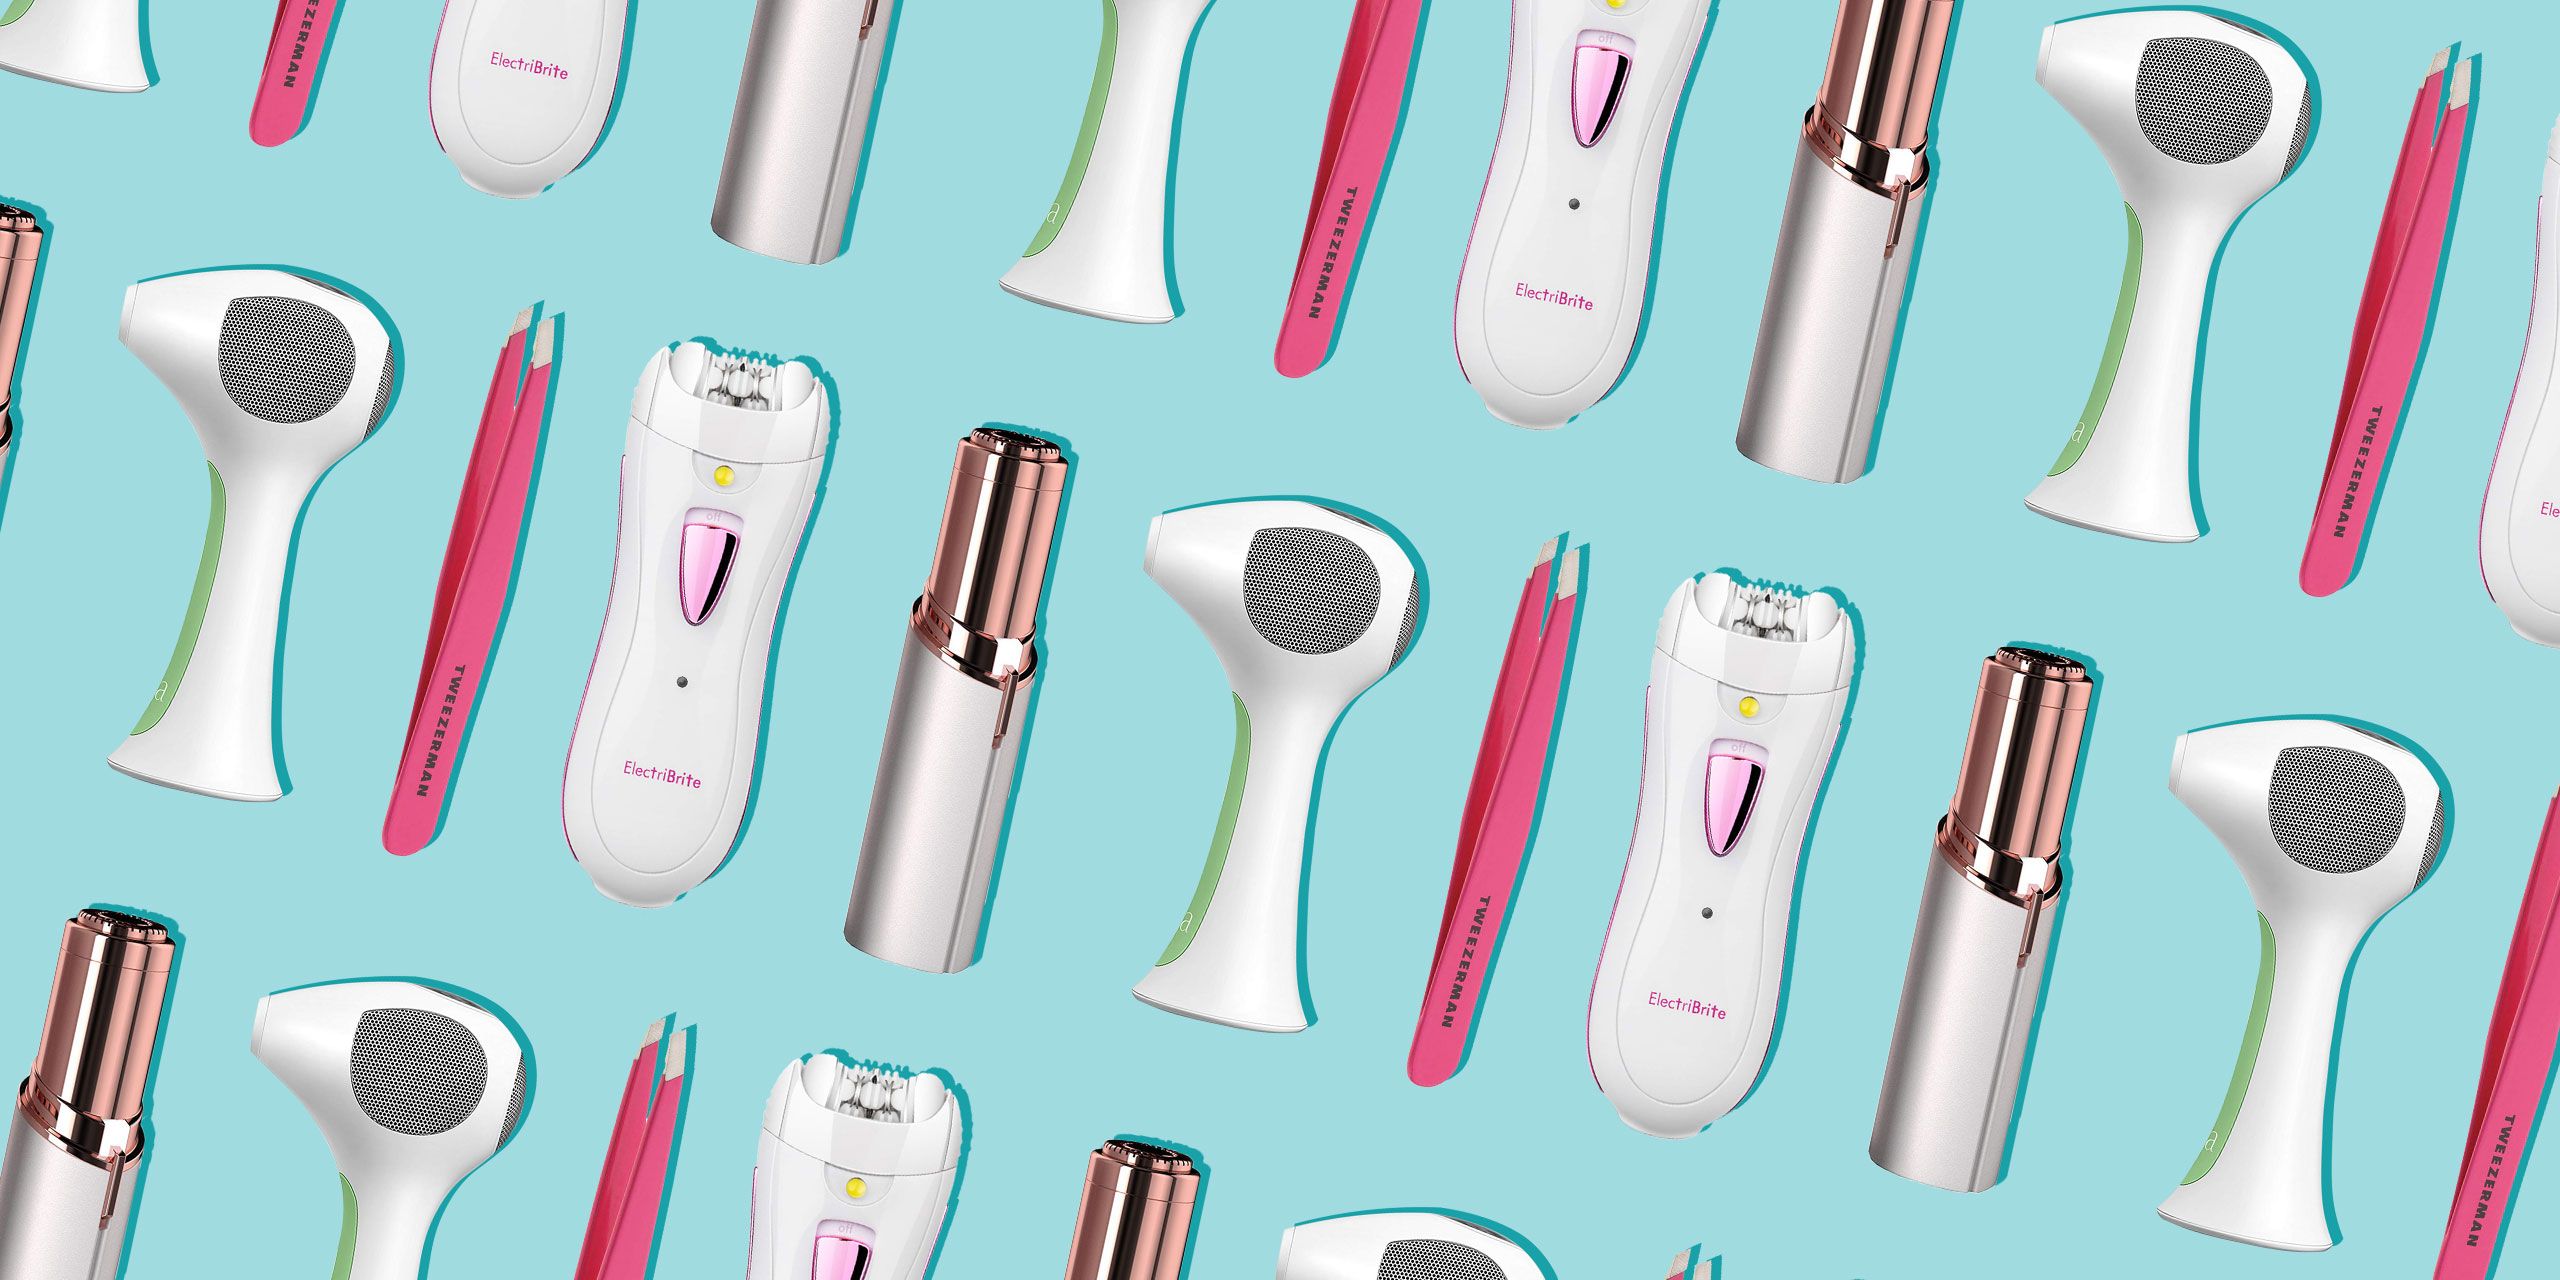 Best Ladies Hair Removal System Hot Sale, 54% OFF 